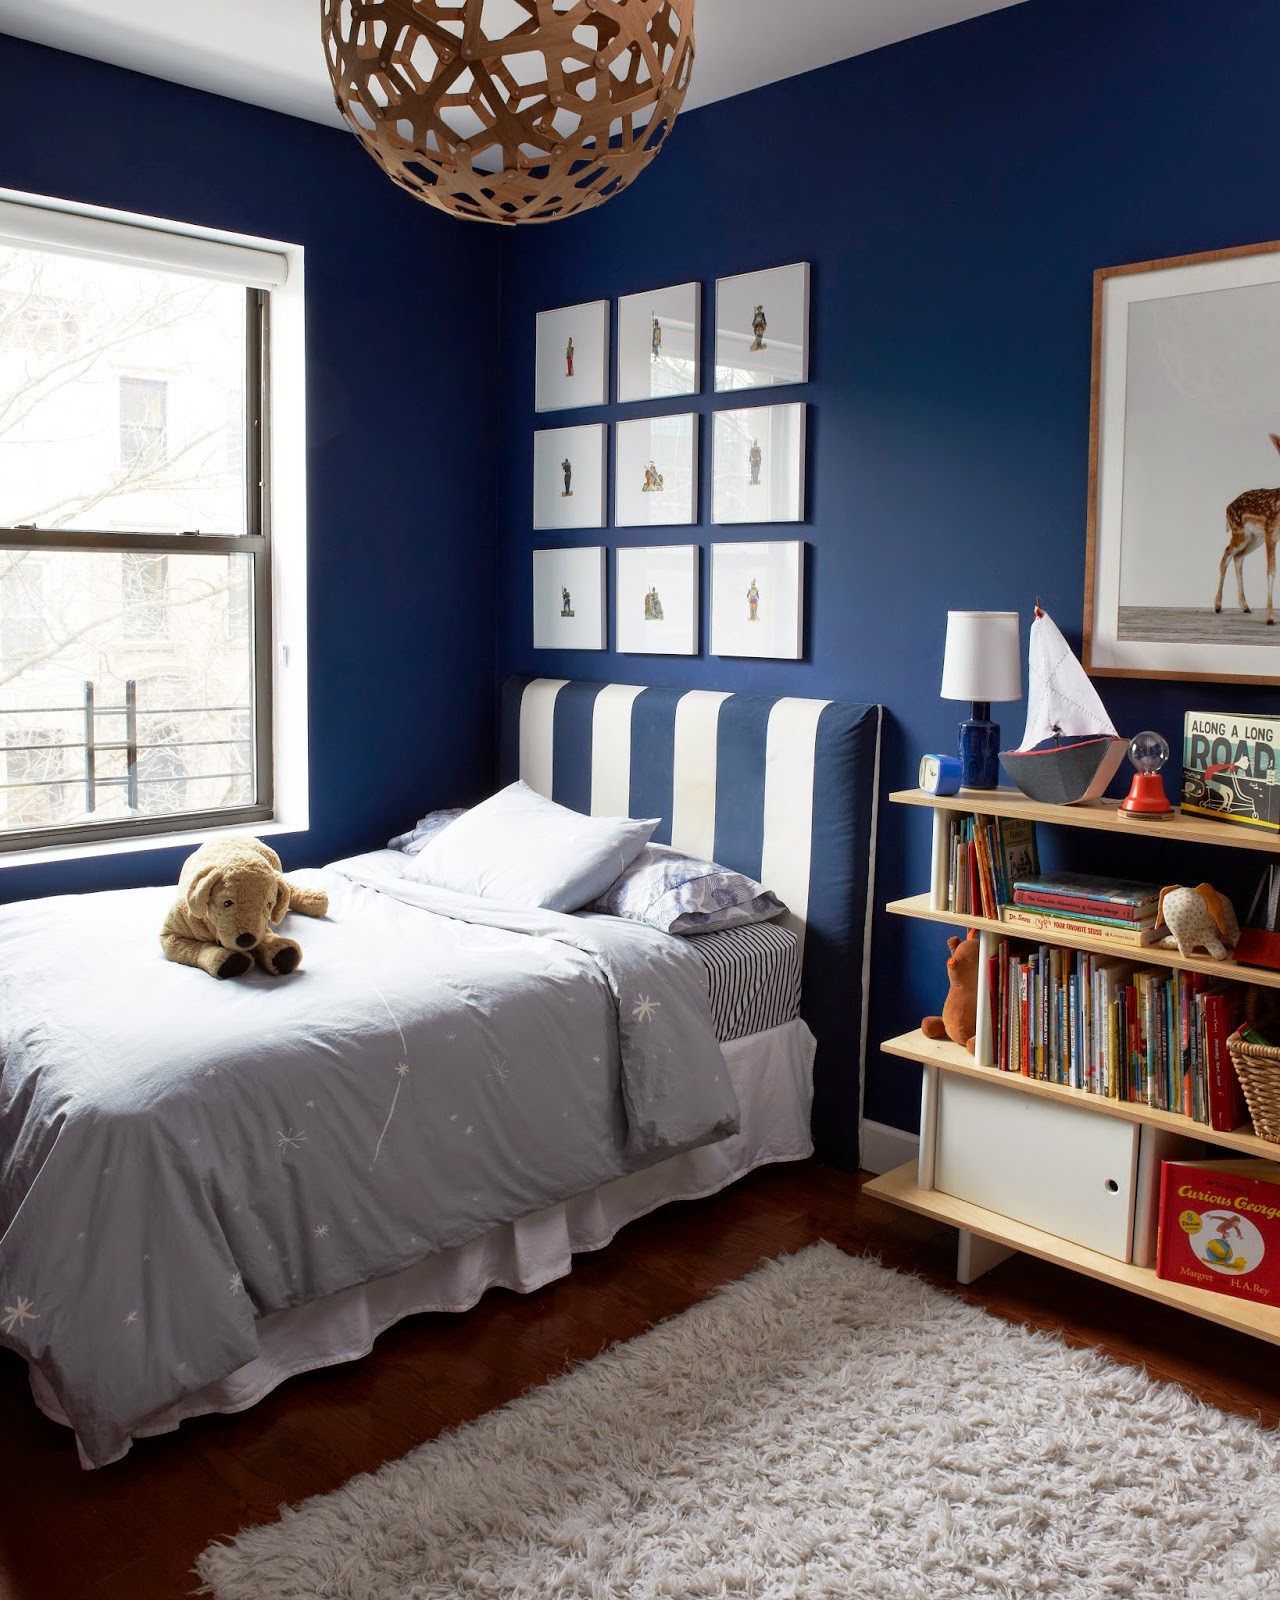 Bedroom Paint Schemes
 Help Which Bedroom Paint Color Would You Choose